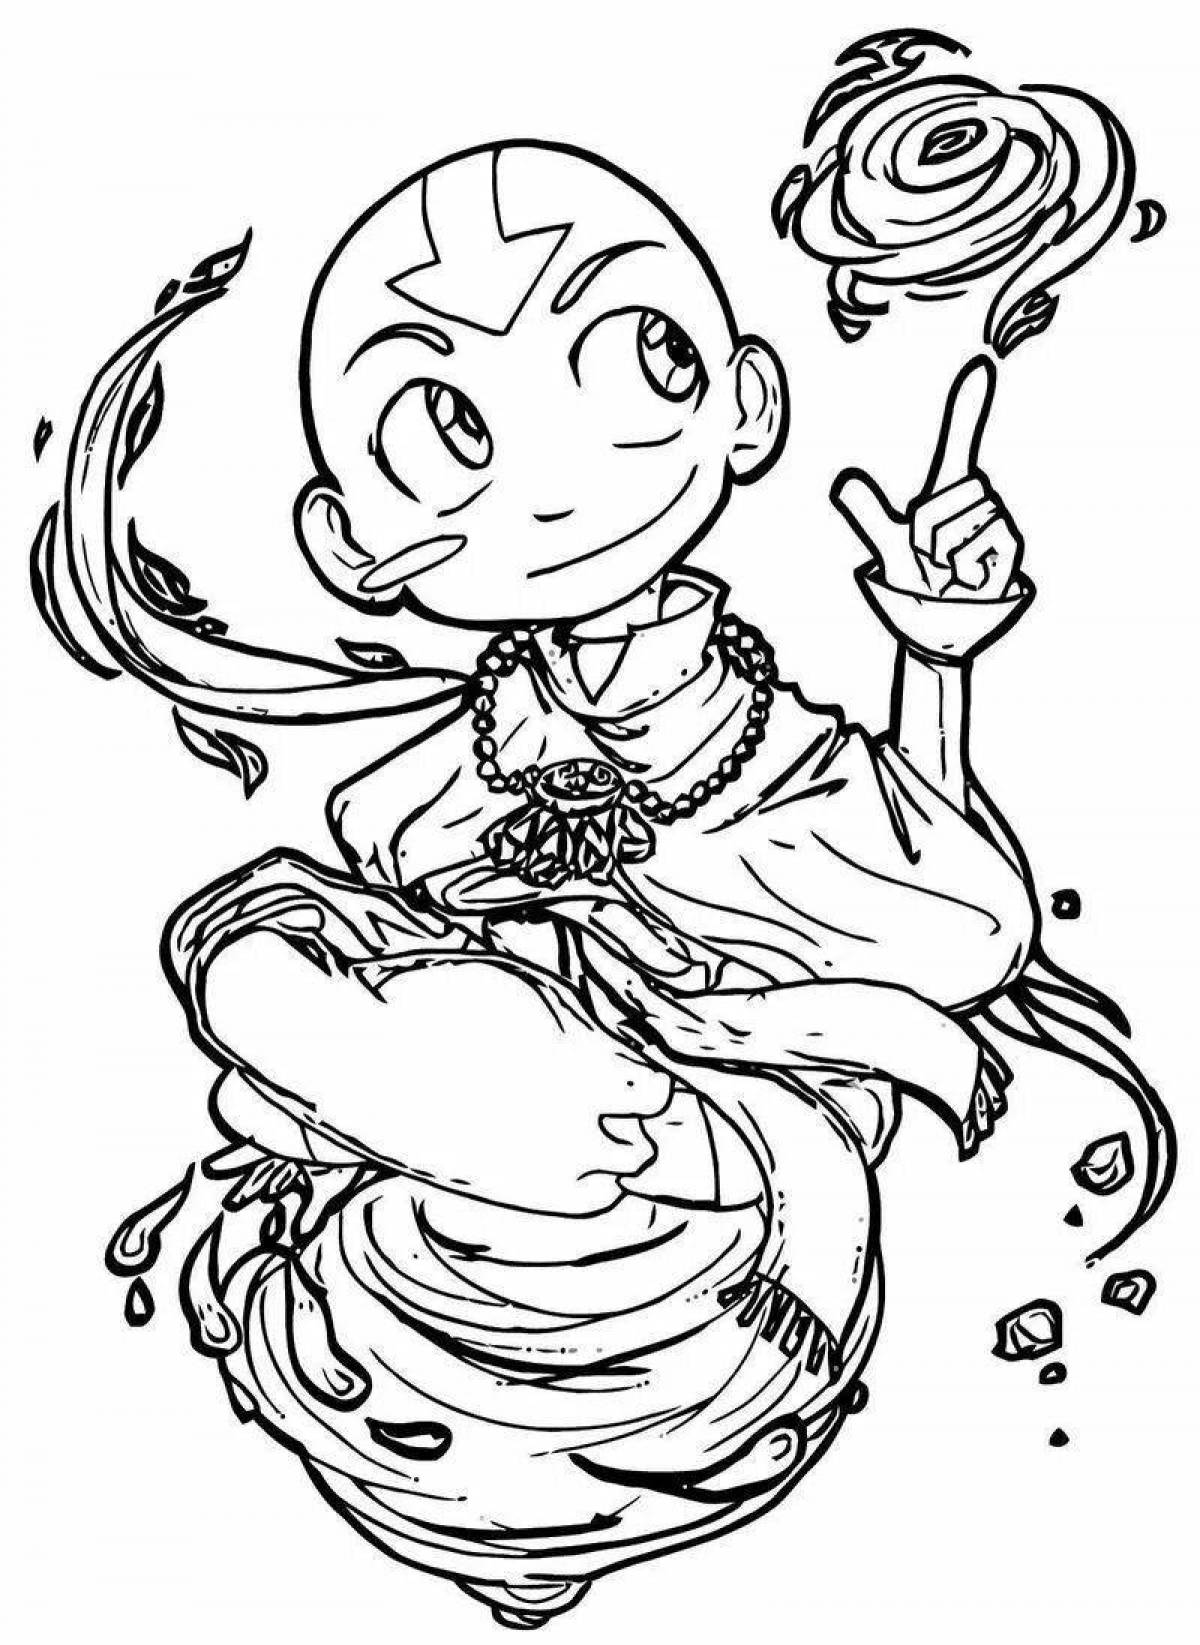 Aang's magical avatar coloring page